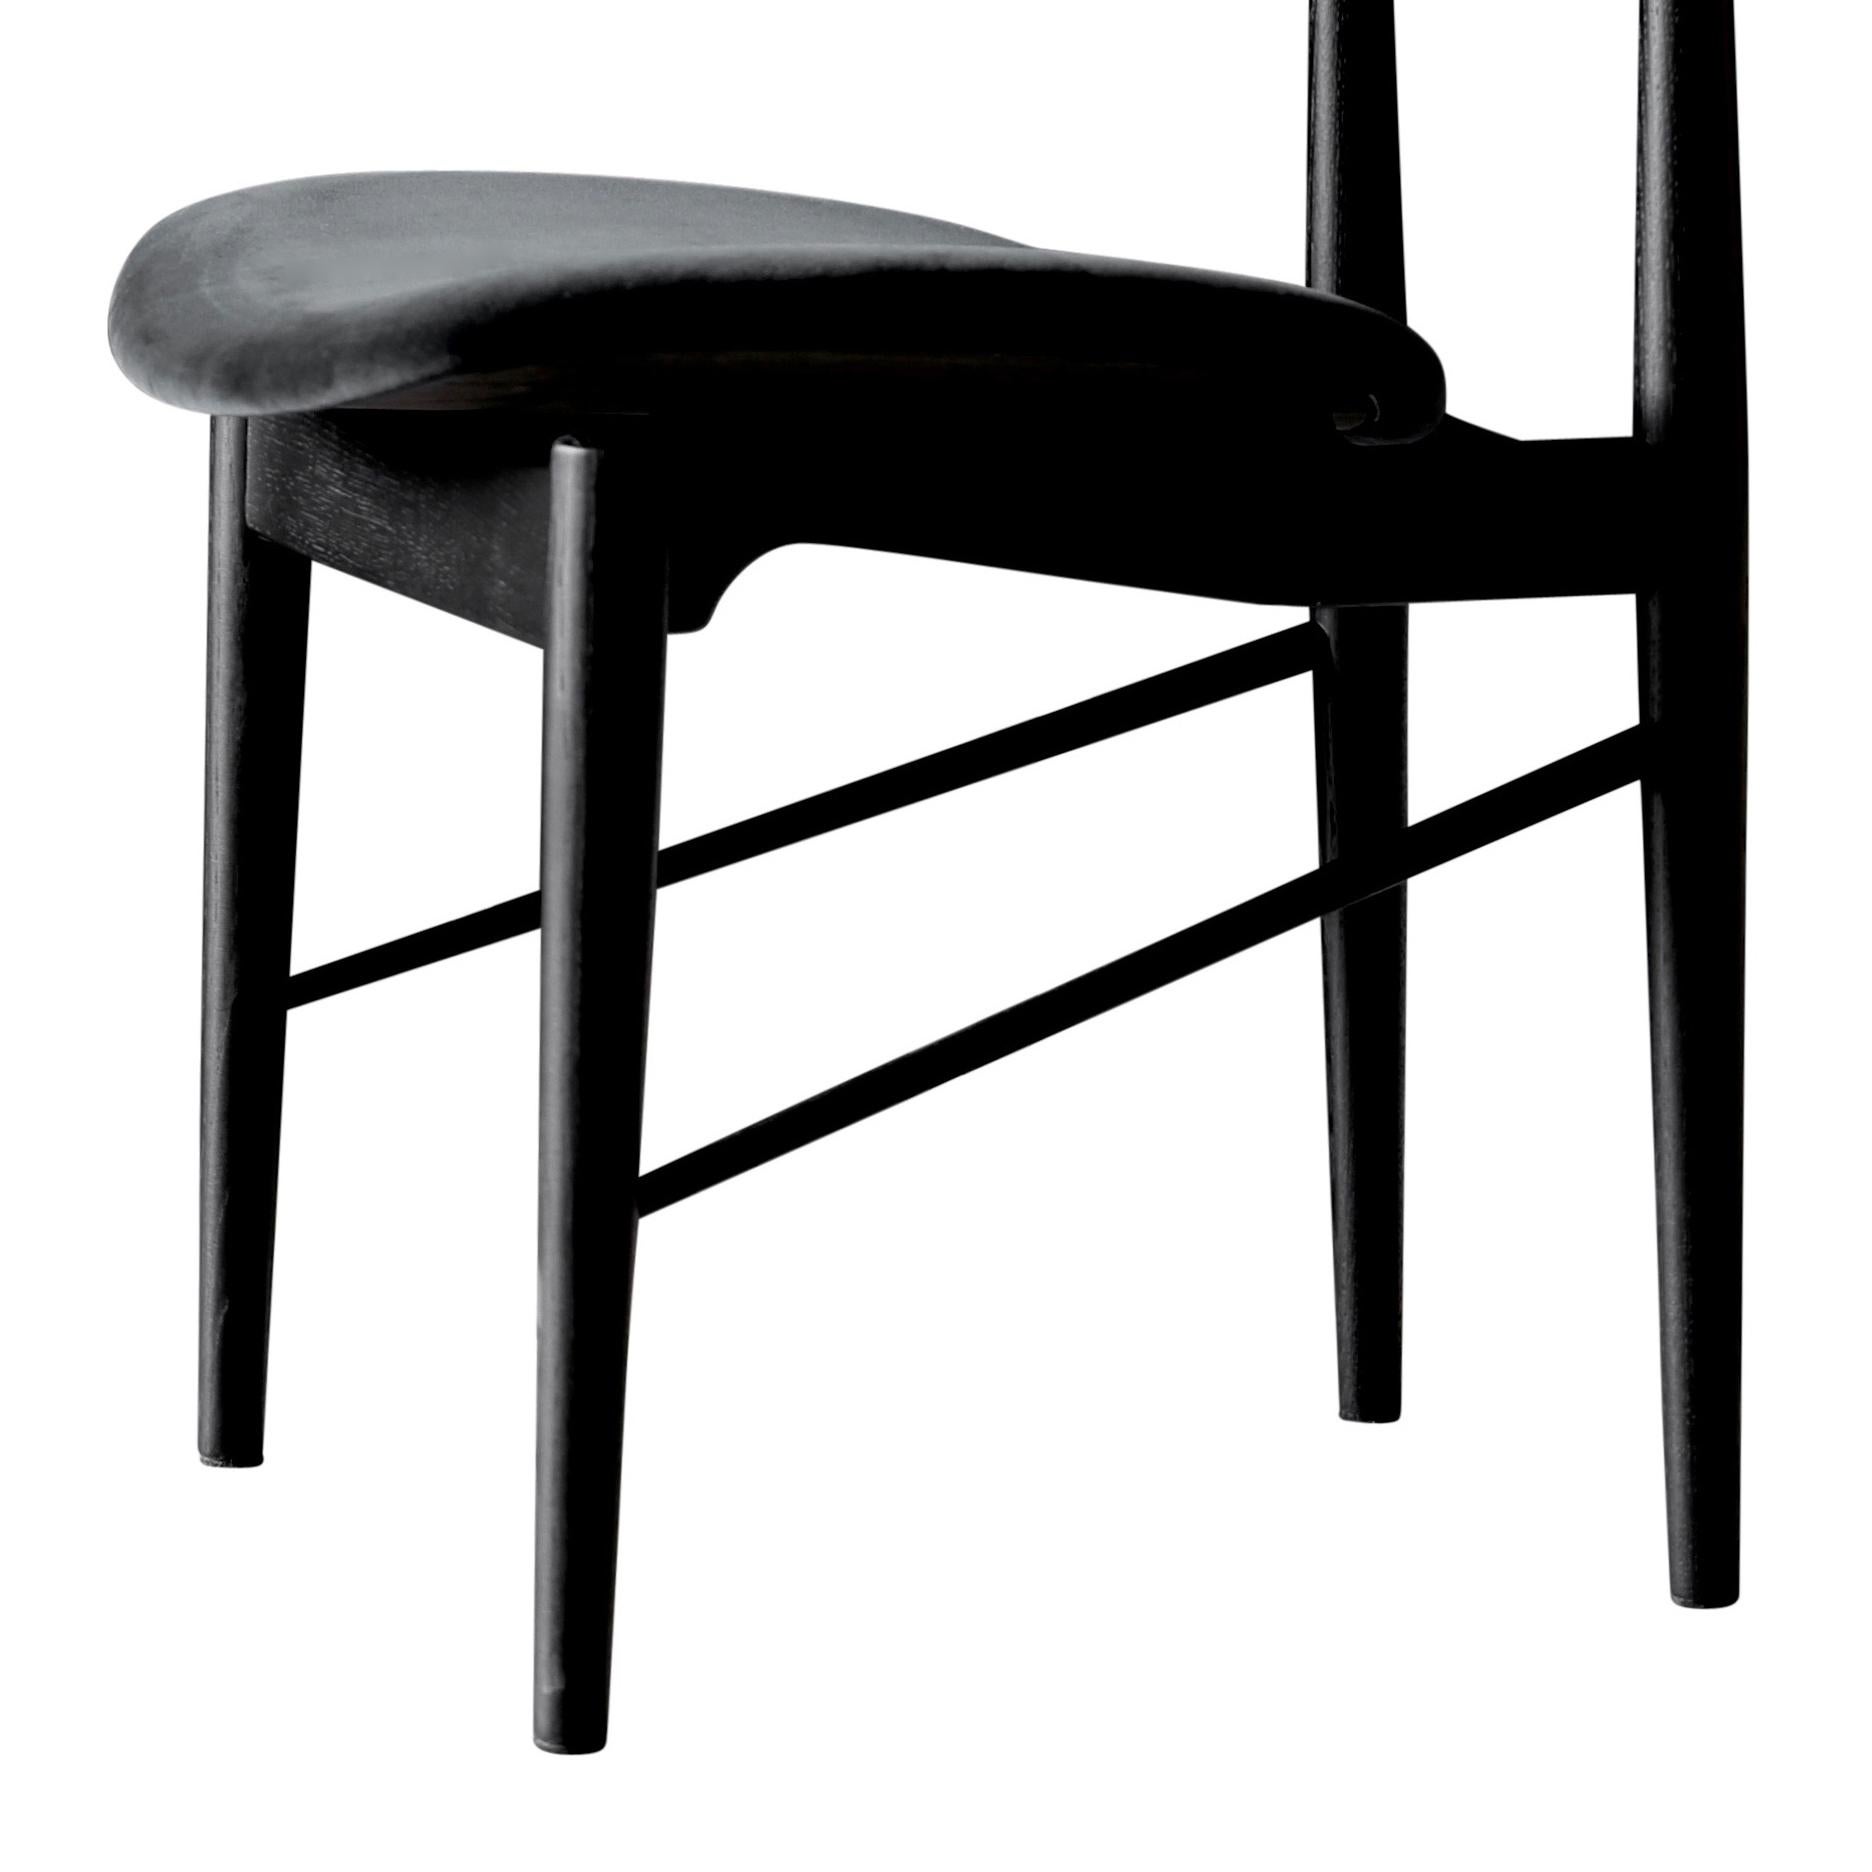 Armchair designed by Finn Juhl in 1953, relaunched in 2015.
Manufactured by House of Finn Juhl in Denmark.

In 1953, Finn Juhl designed this simple yet elegant dining chair for the furniture manufacturer Bovirke, which we have relaunched under